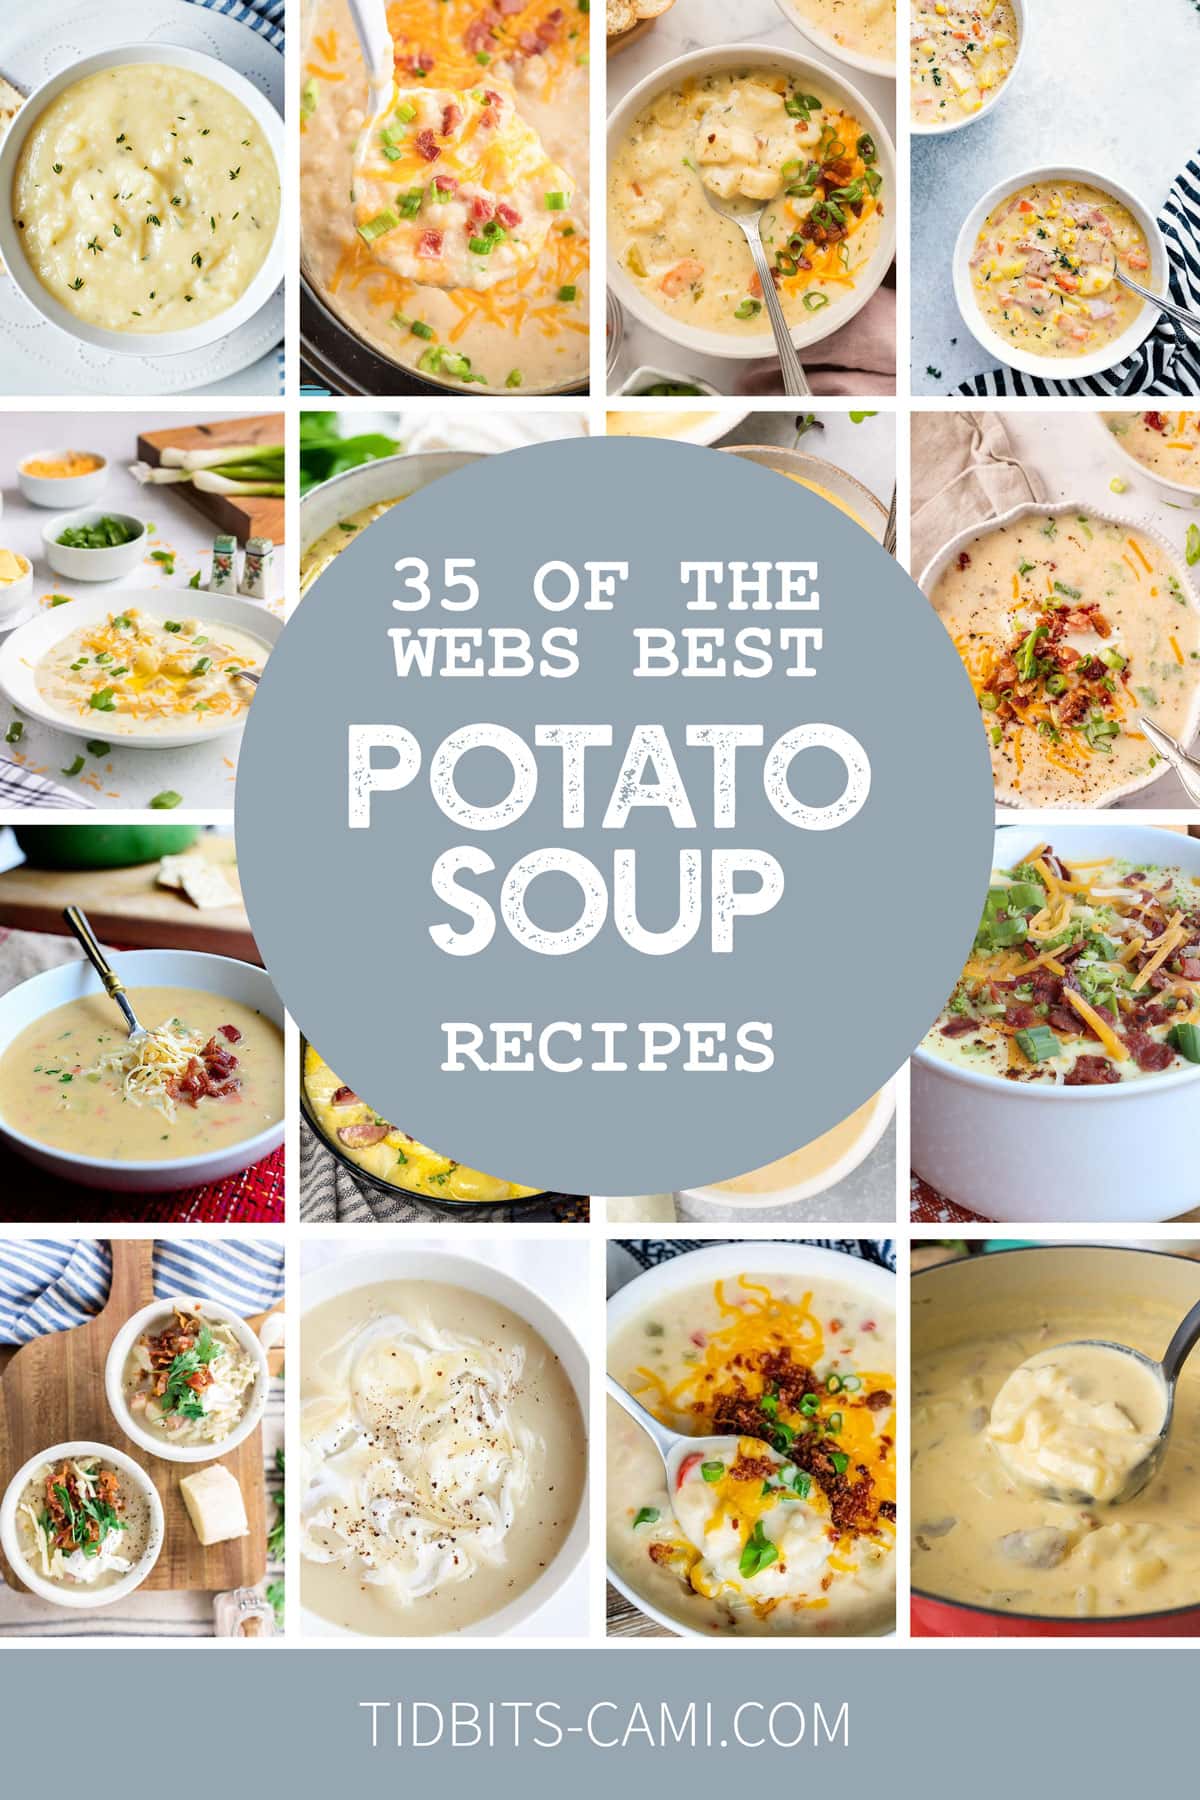 Collage of different potato soup recipe images